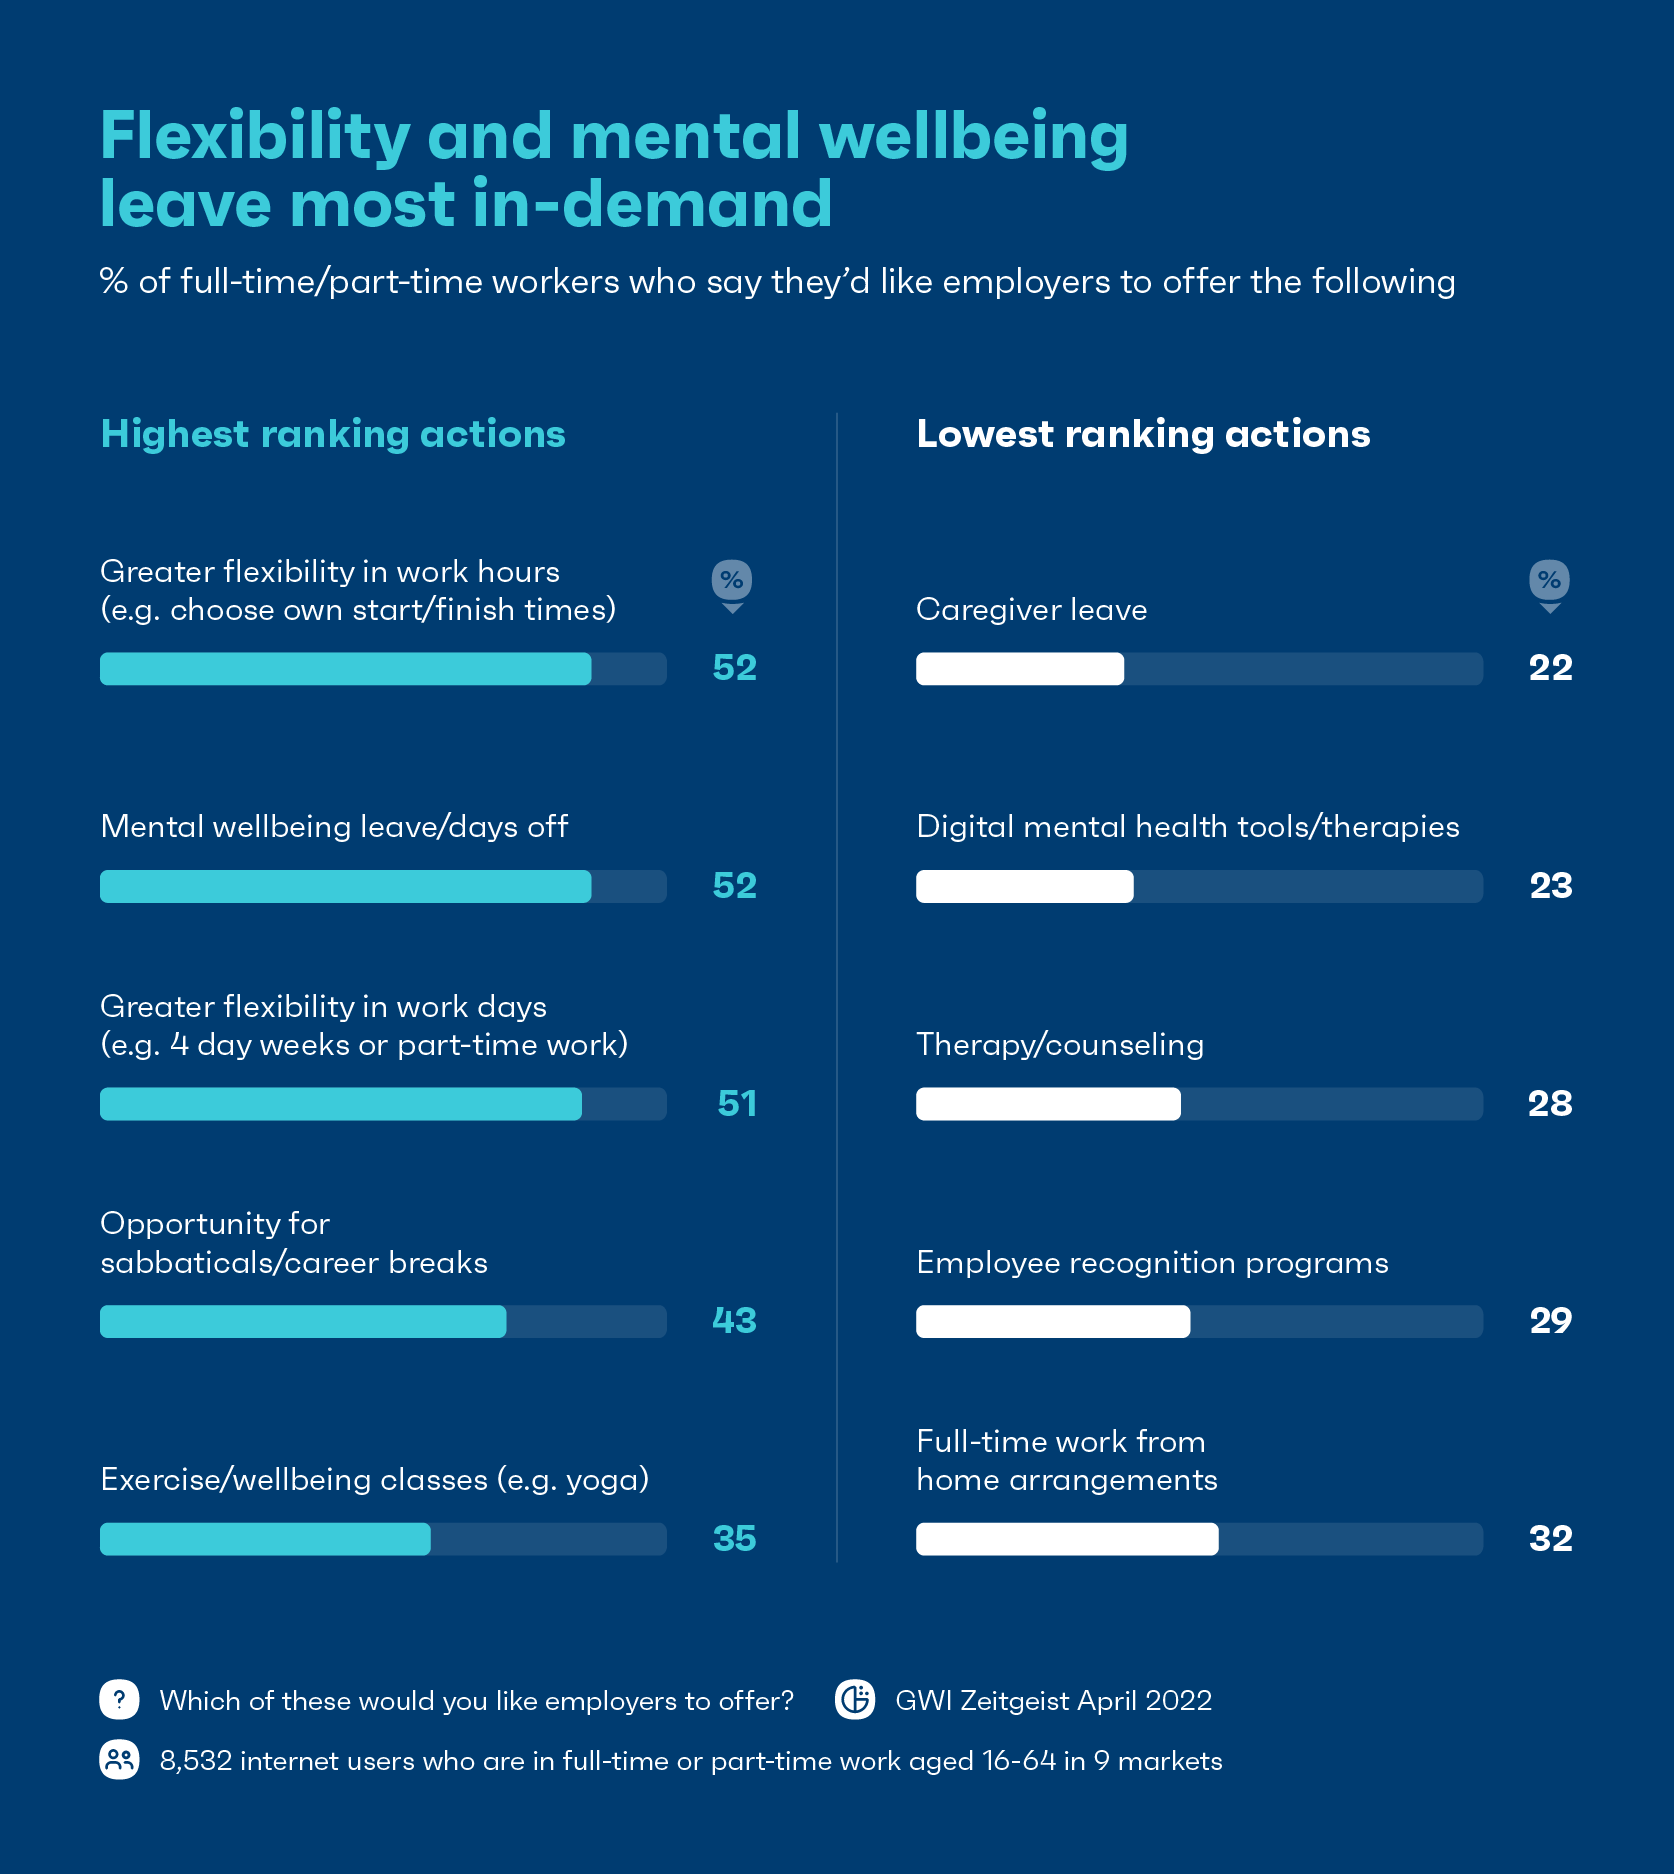 Chart showing that flexibility and mental wellbeing leave most in-demand